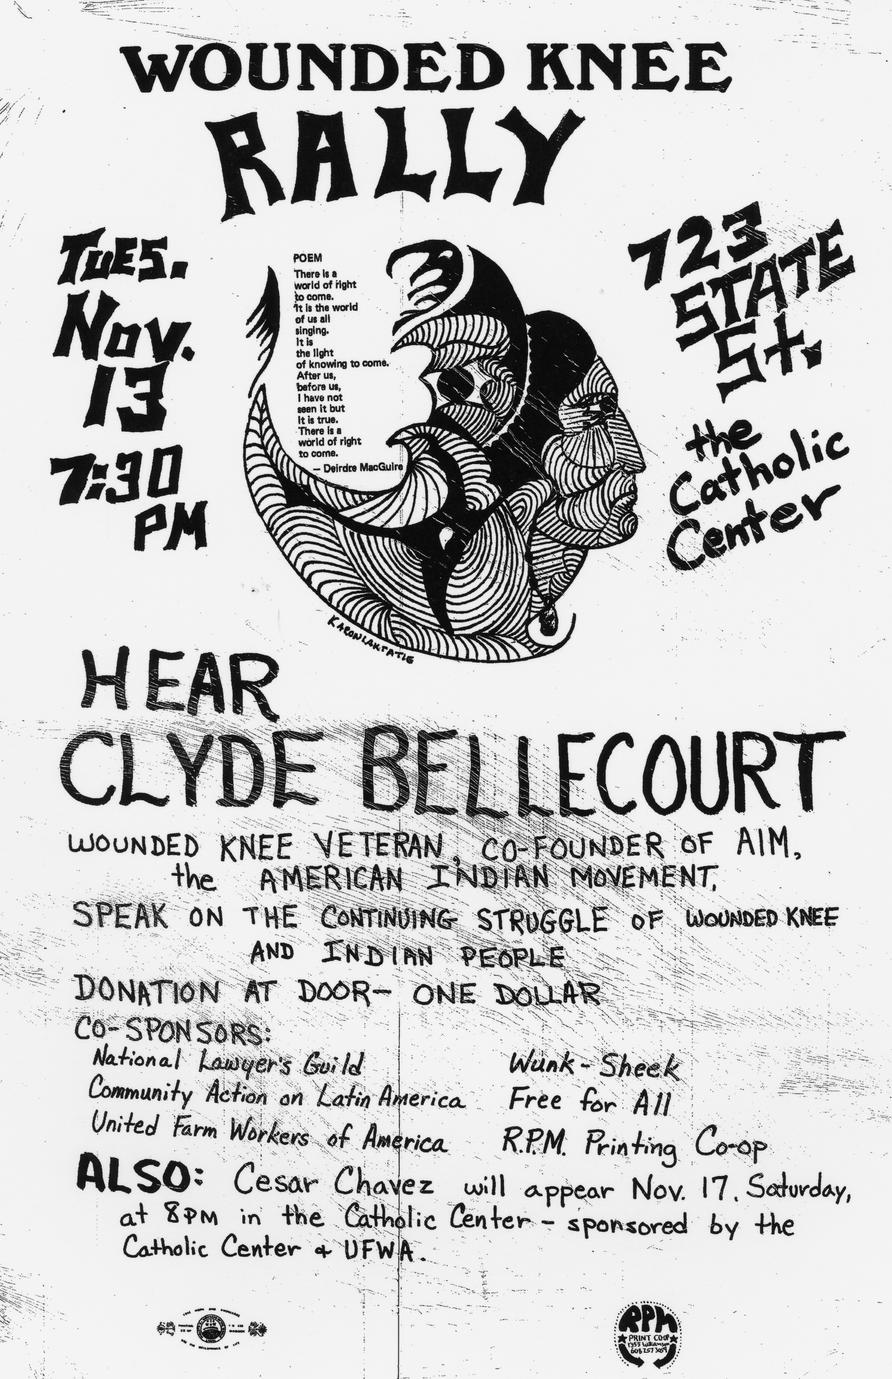 Flyer for Wounded Knee rally